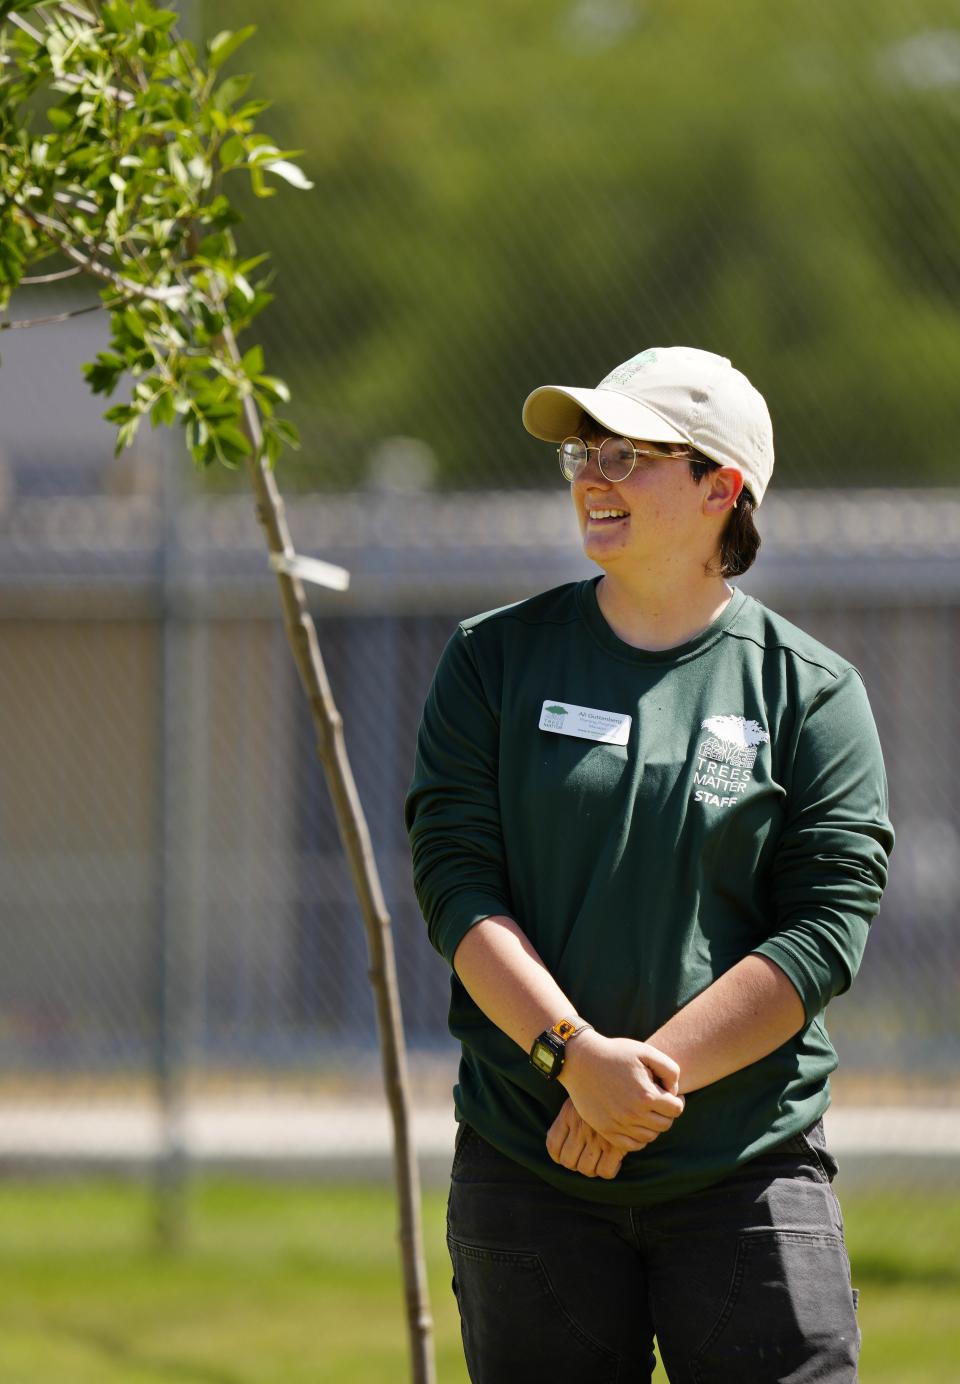 Ali Guttenberg, program manager from Trees Matter, poses at Bethune Elementary School in Phoenix on May 11, 2023, where newly planted trees will add to a canopy of shade cover for the students.